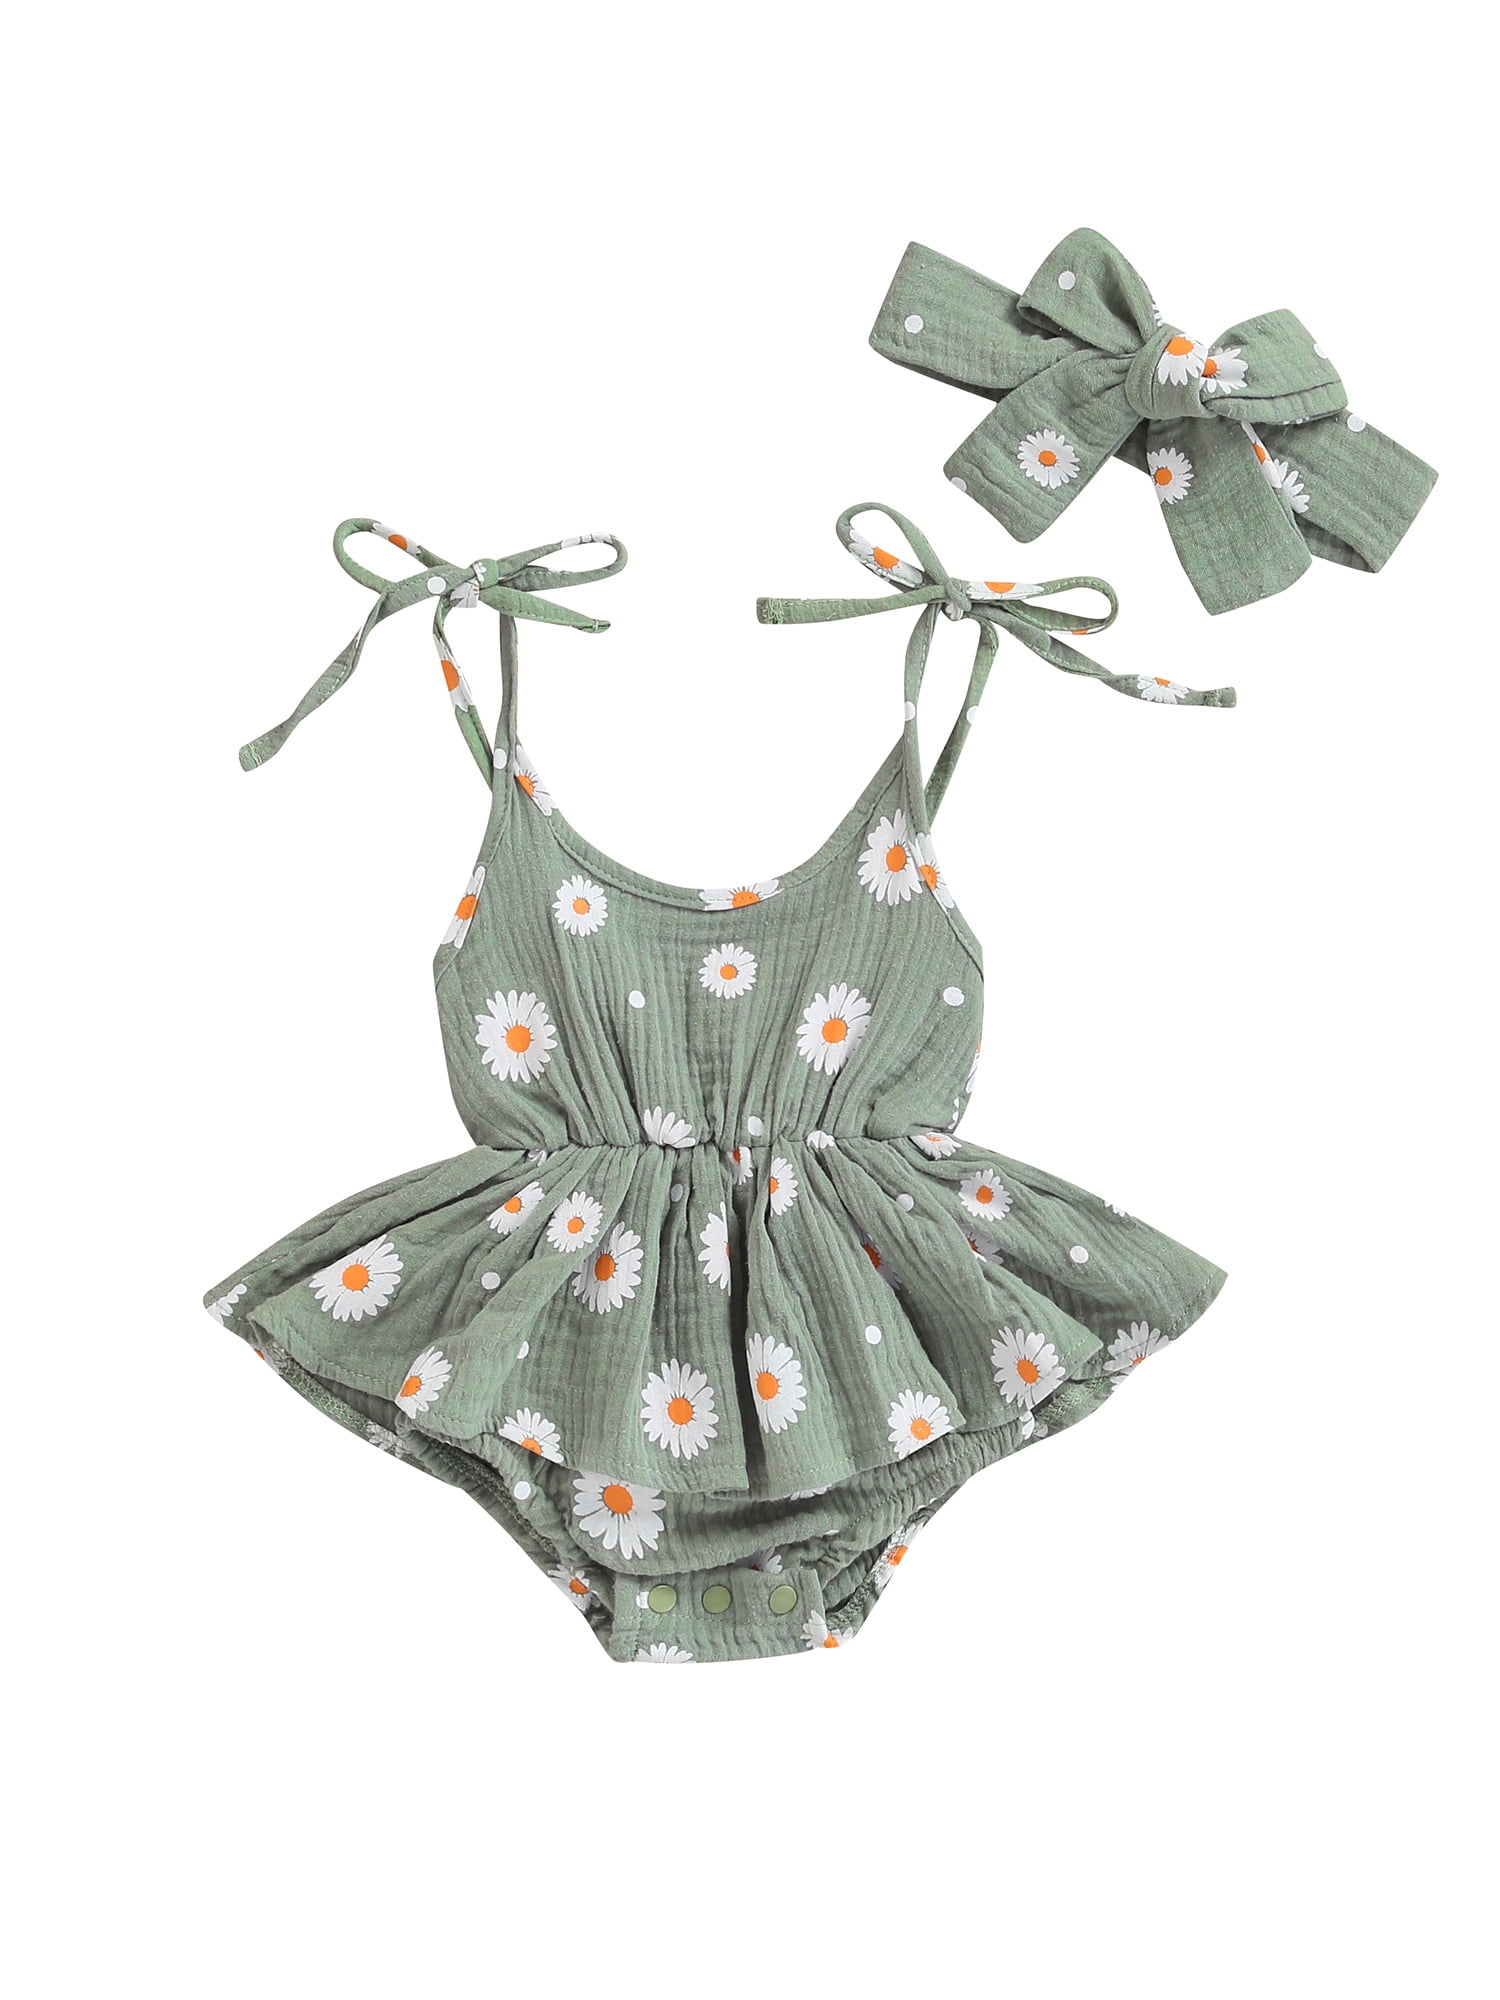 Cactus Baby Girl Floral Romper Strap Rompers Outfits Clothes Bodysuit Jumpsuit 